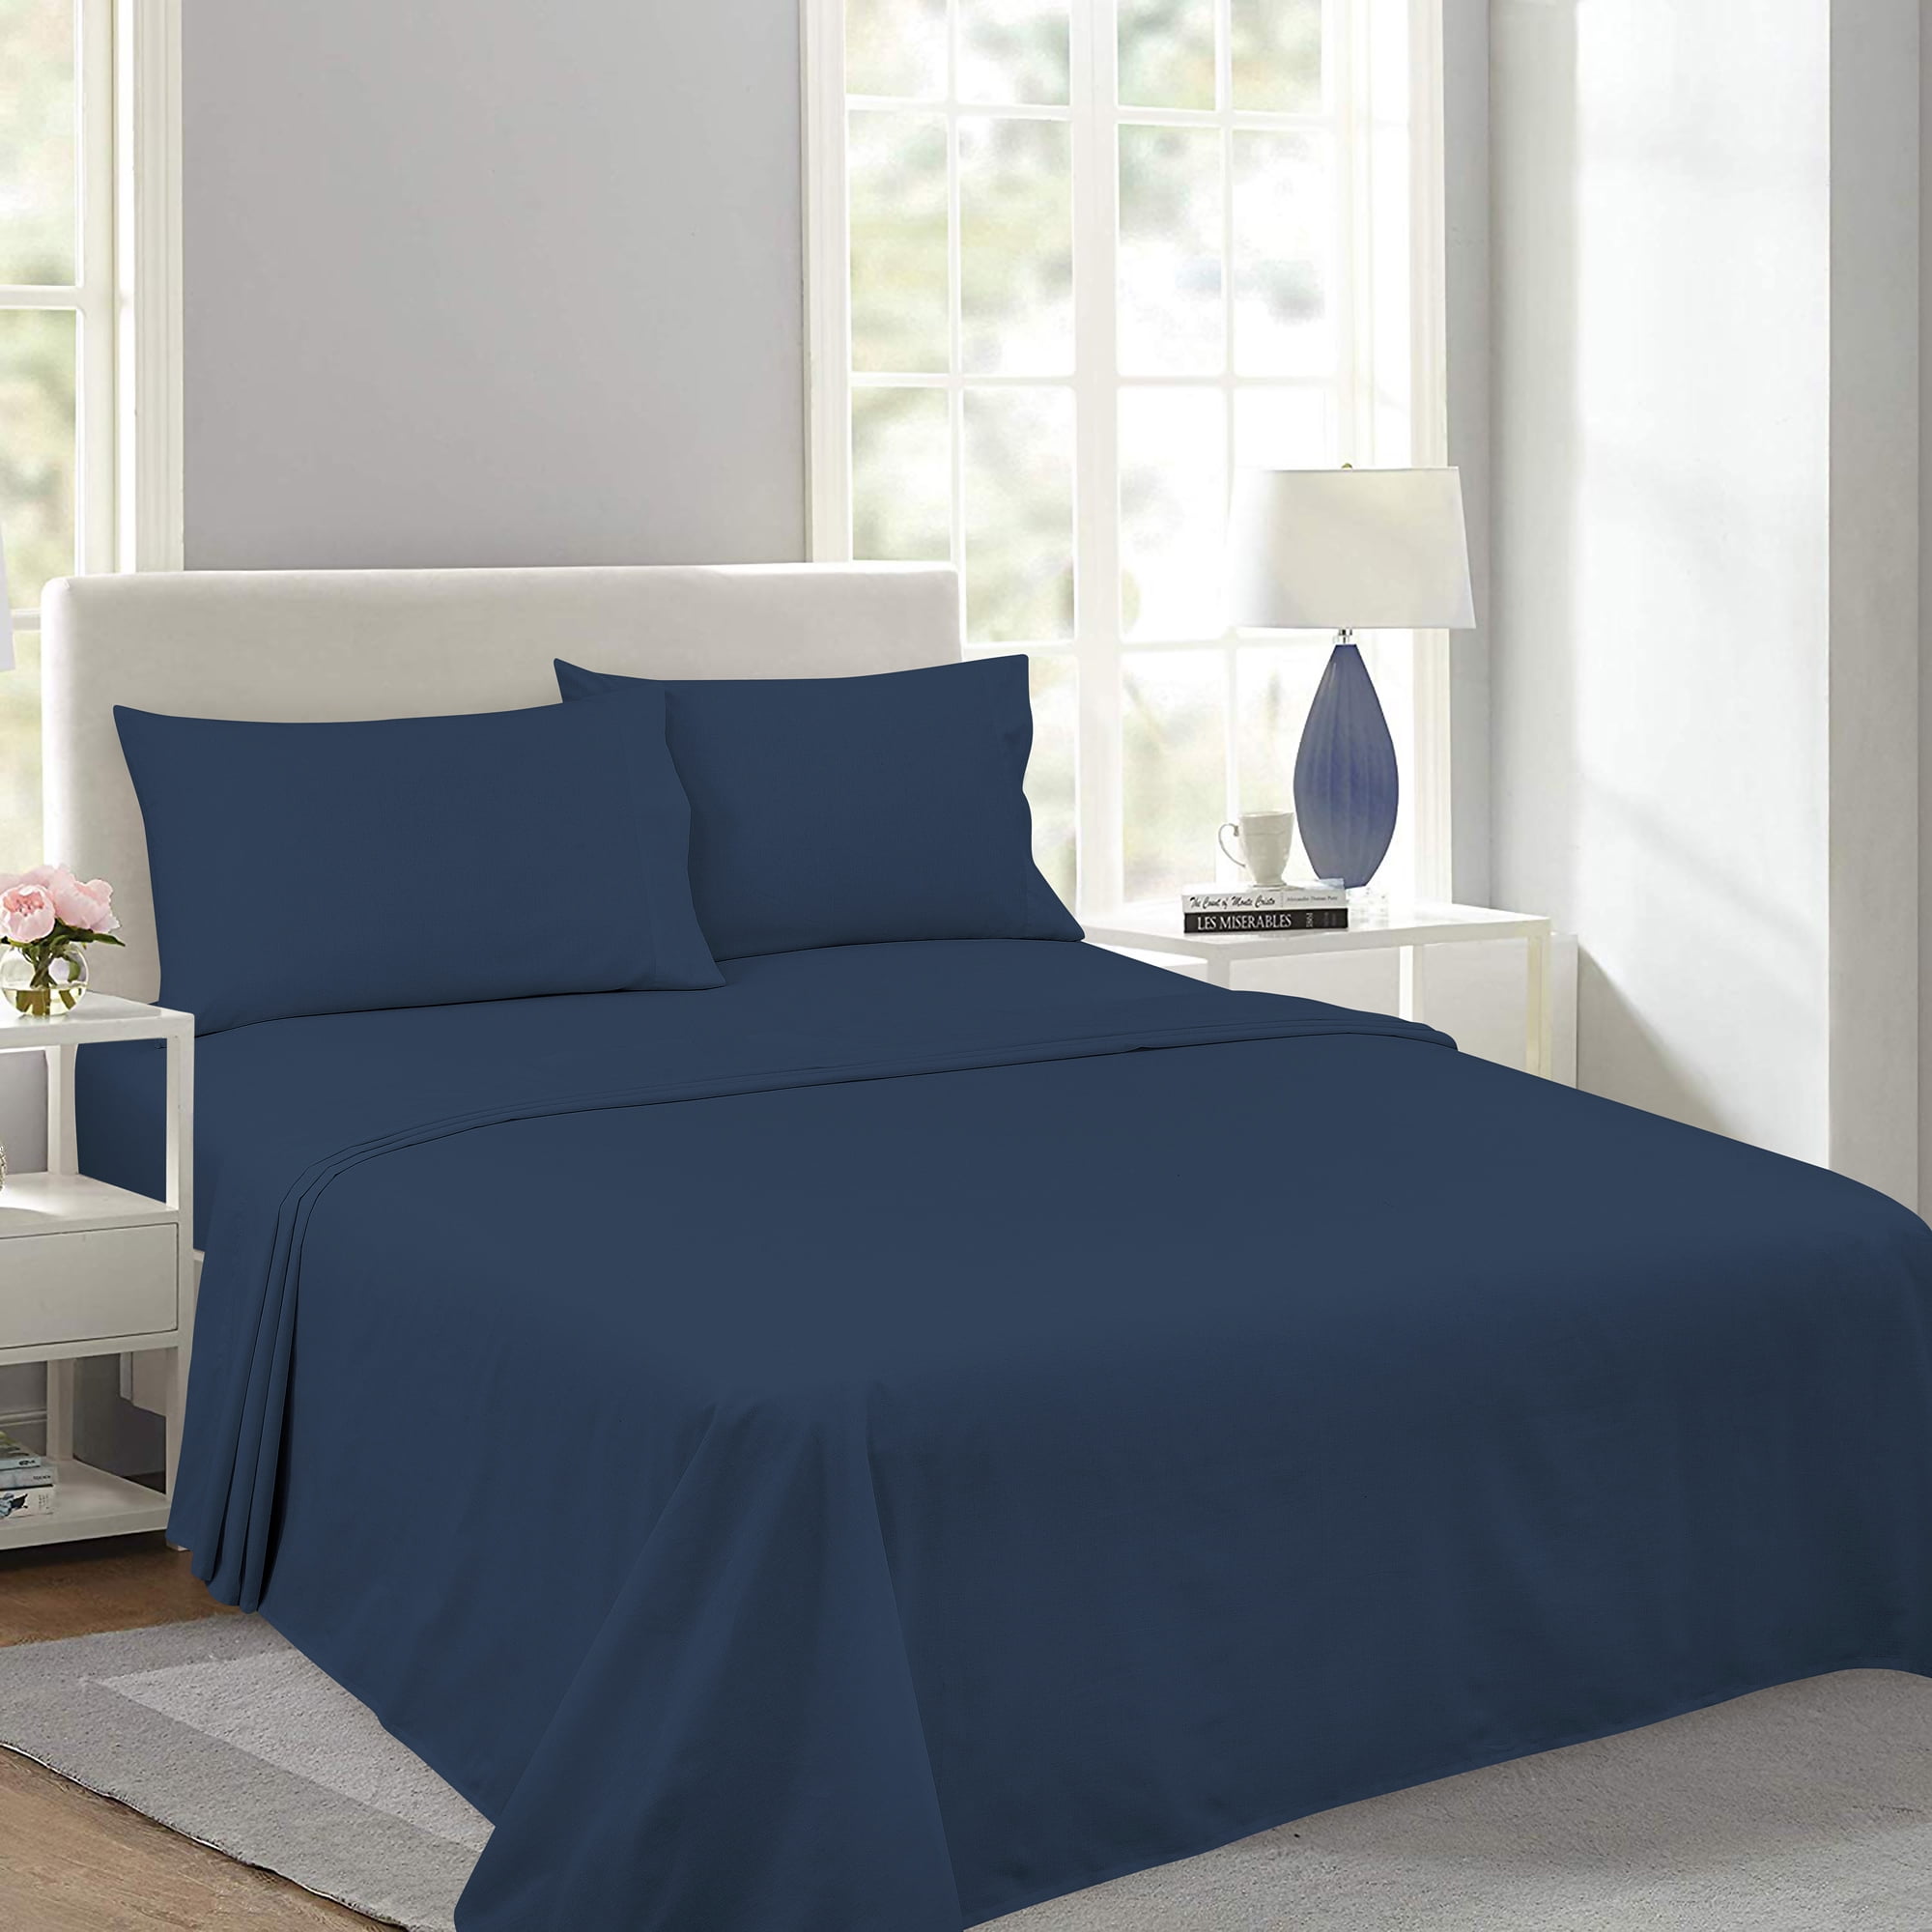 Royale Linens Soft Home Brushed Percale Ultra Soft 100 Cotton, Twin 3Piece Sheet Set Walmart